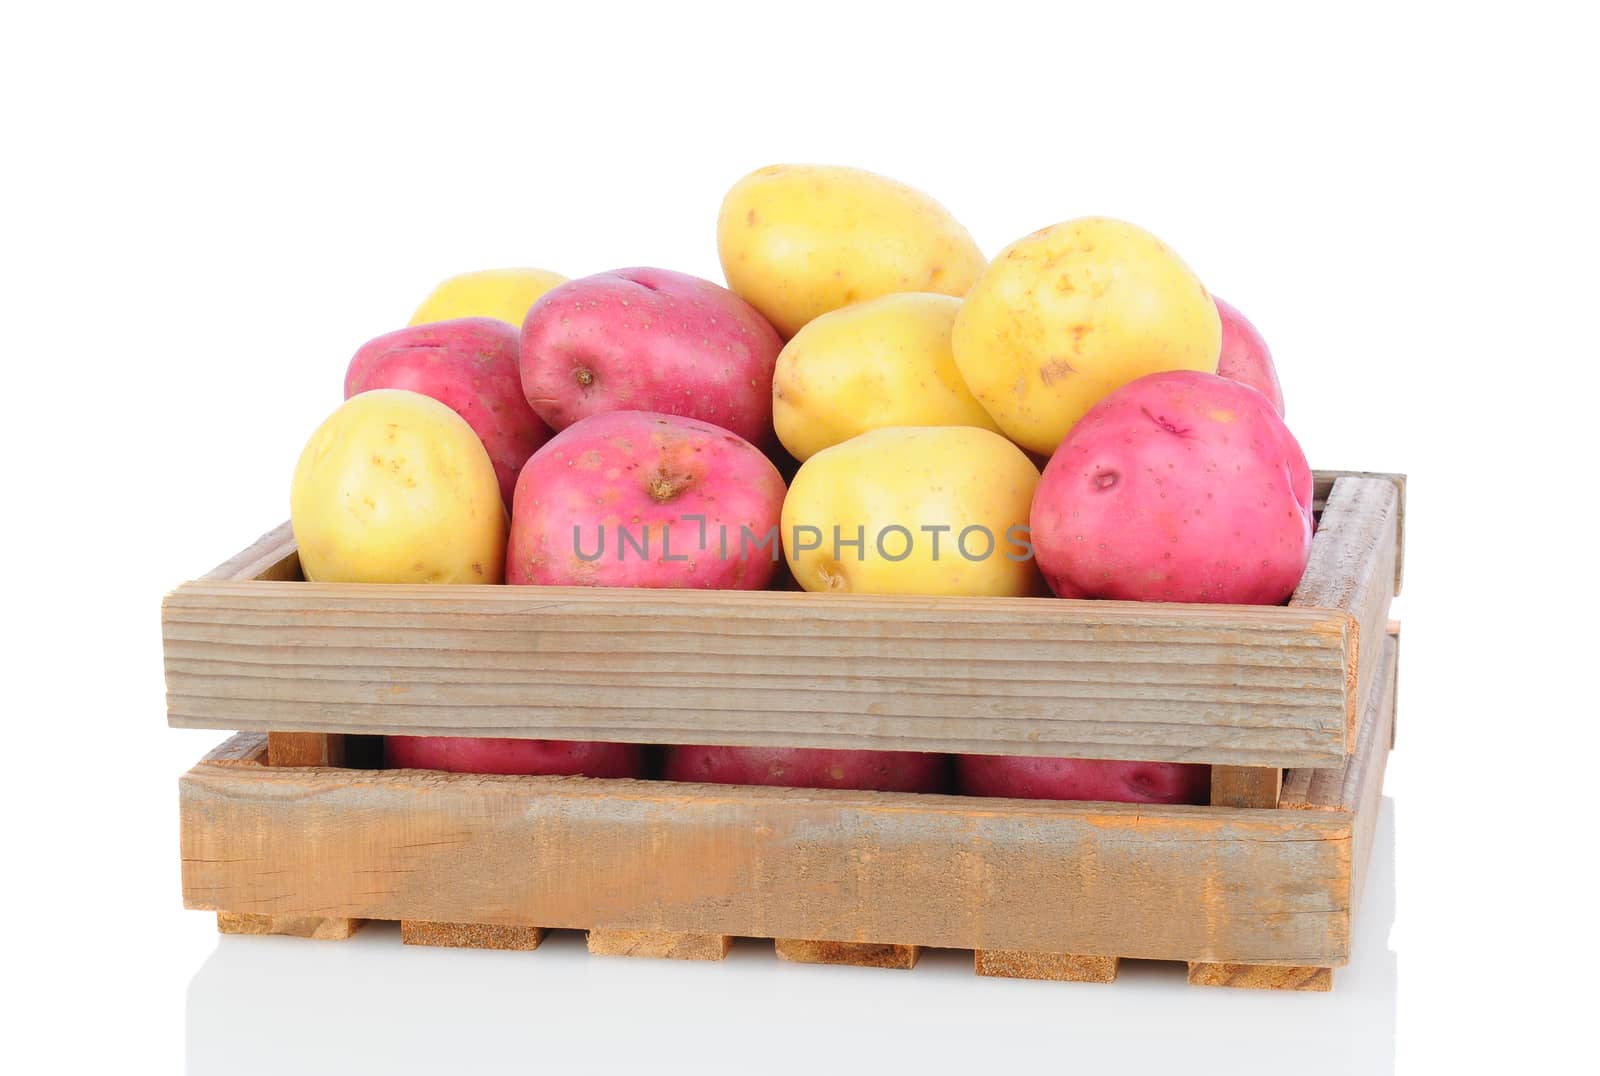 A wooden crate full of red and white potatoes on a white background with reflection. Horizontal Format.